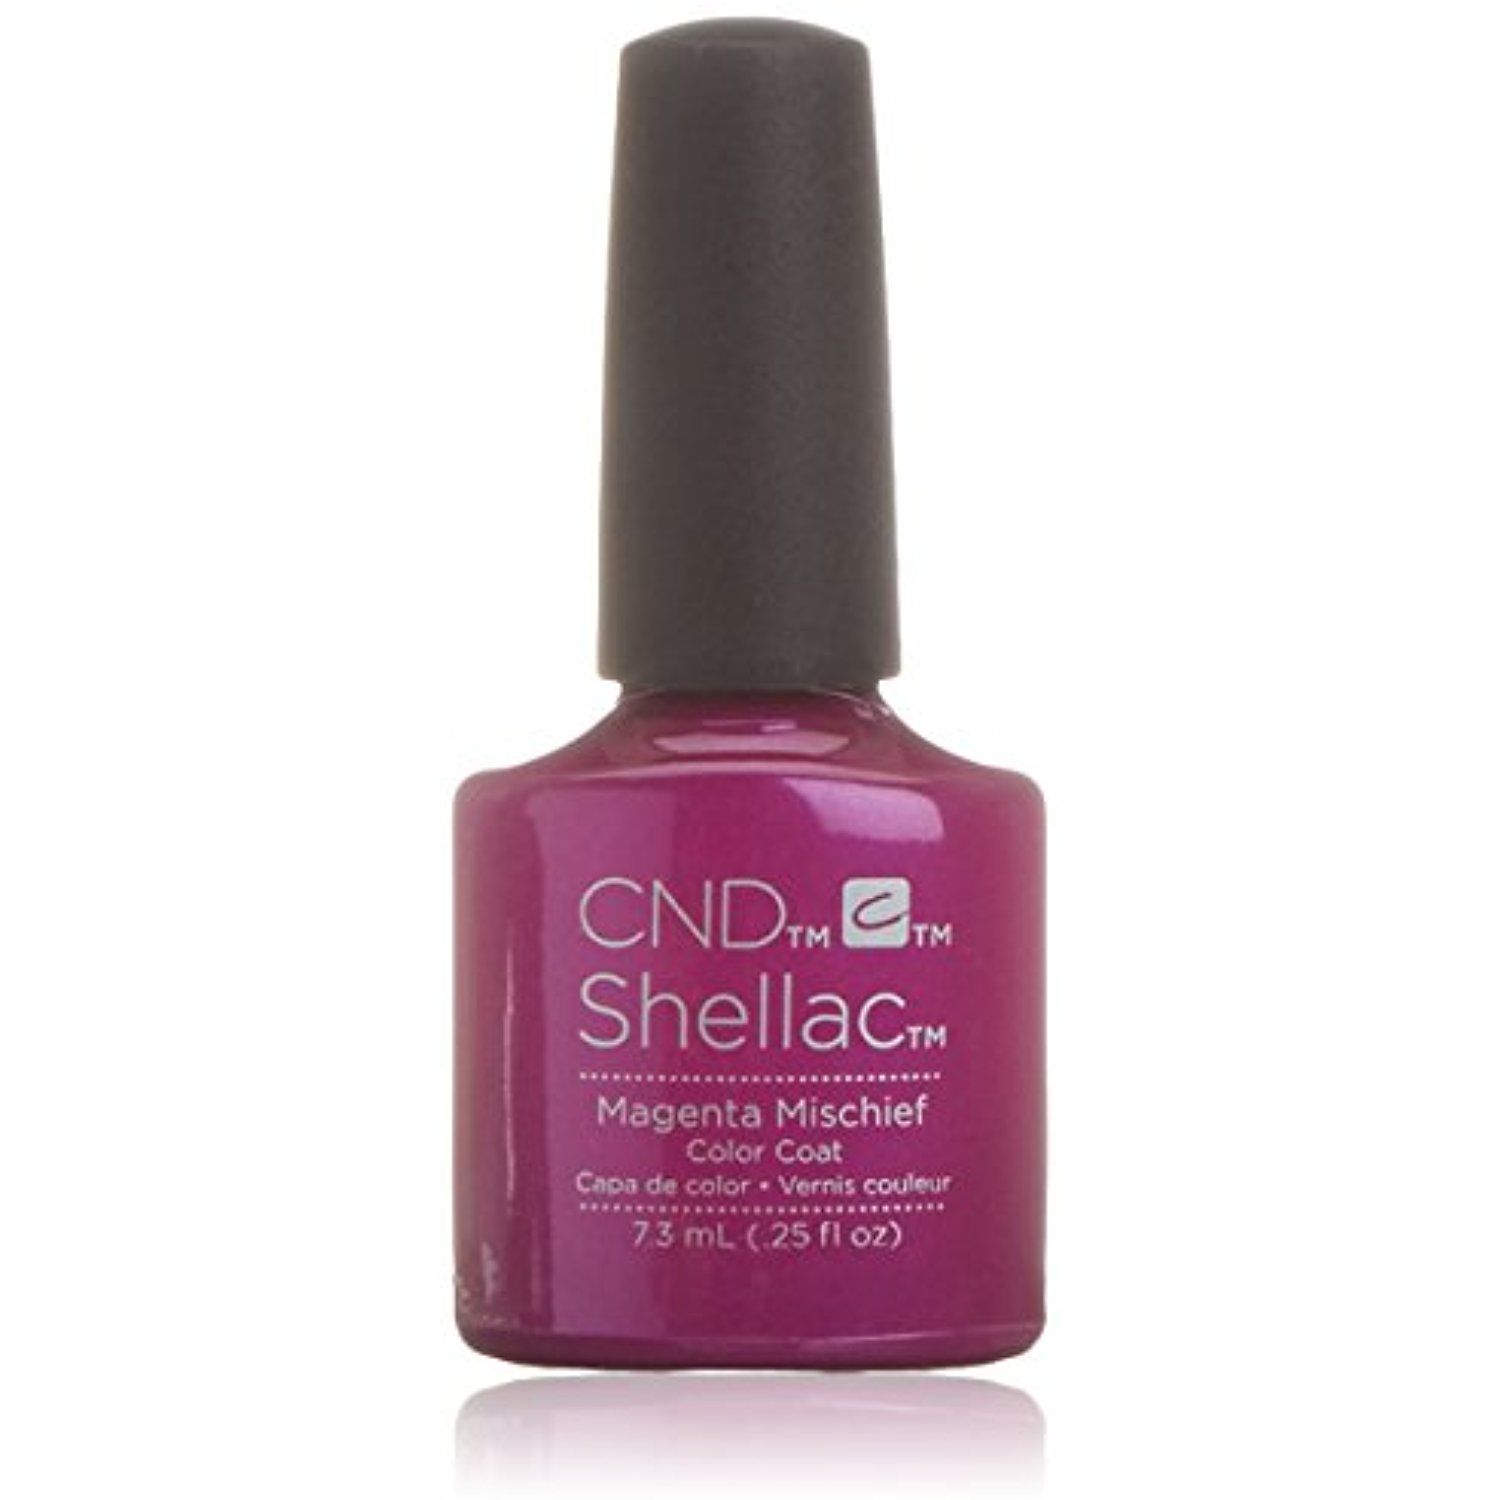 CND Shellac, Magenta Mischief ** You can find more details ...